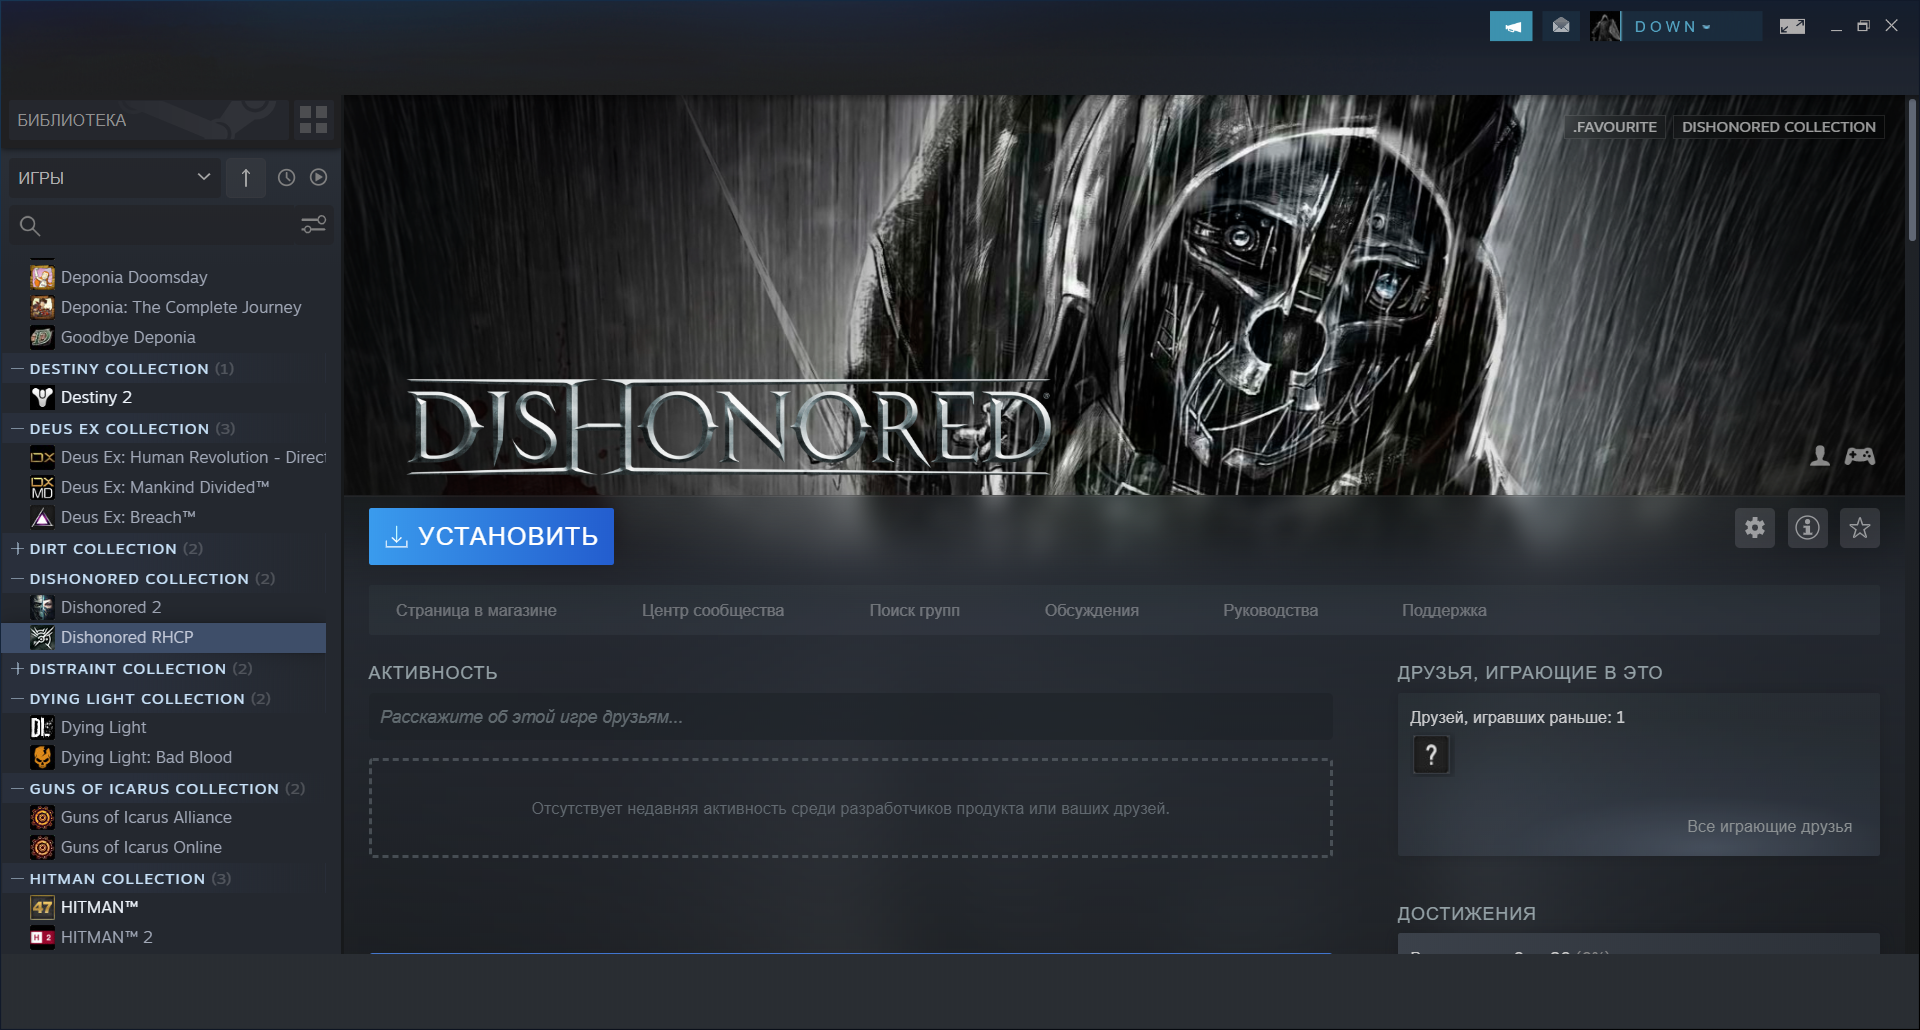 Dishonored RHCP correct cover/ image 10